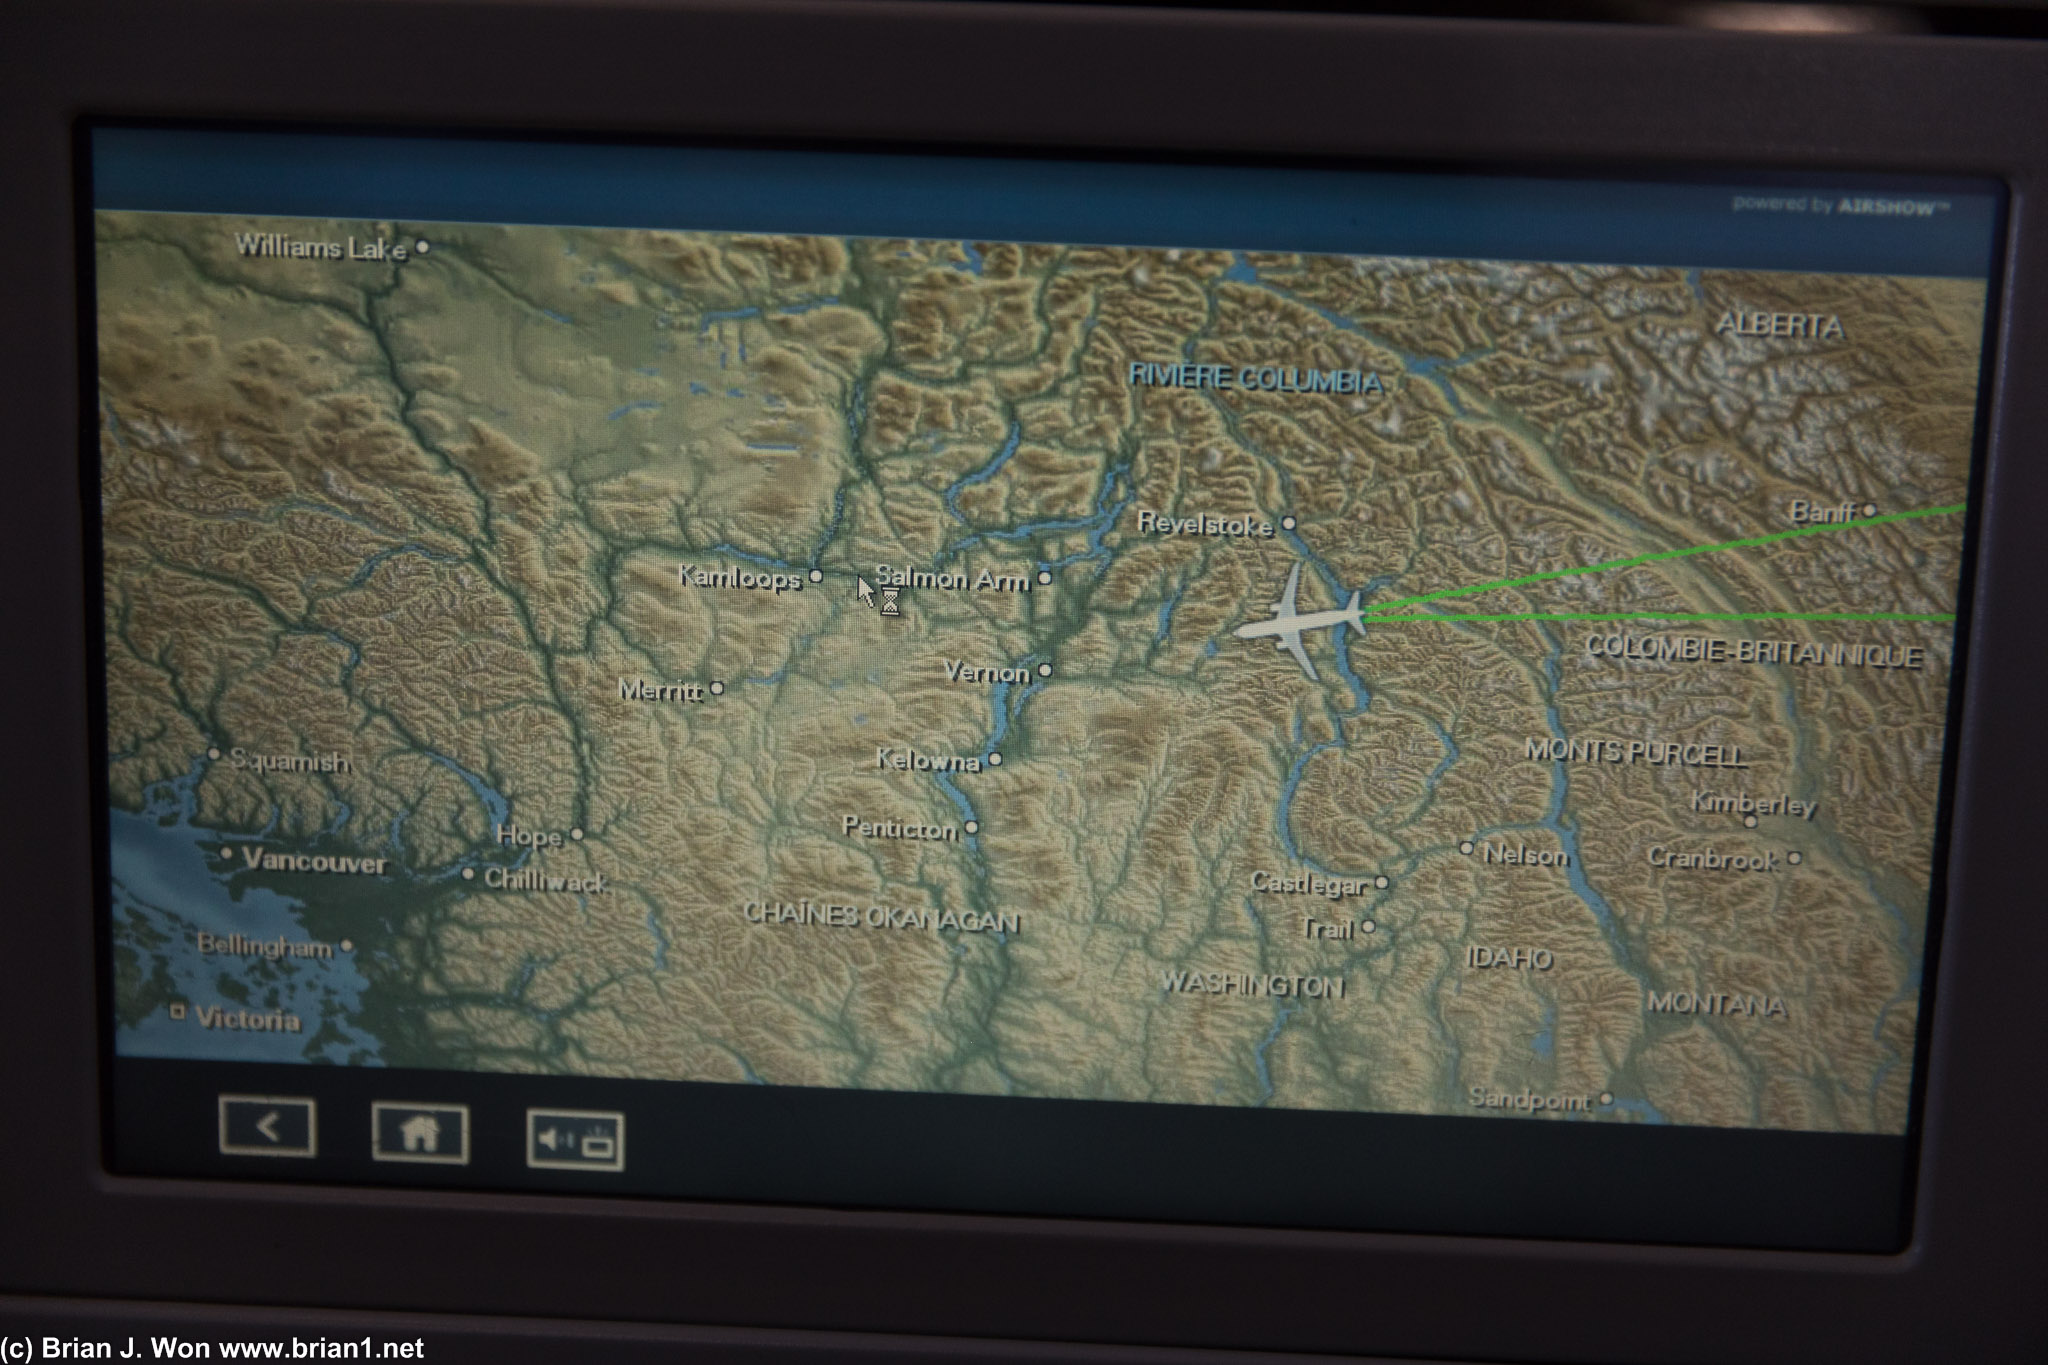 In-flight map was very confused. Not sure how we can come from two places at once...